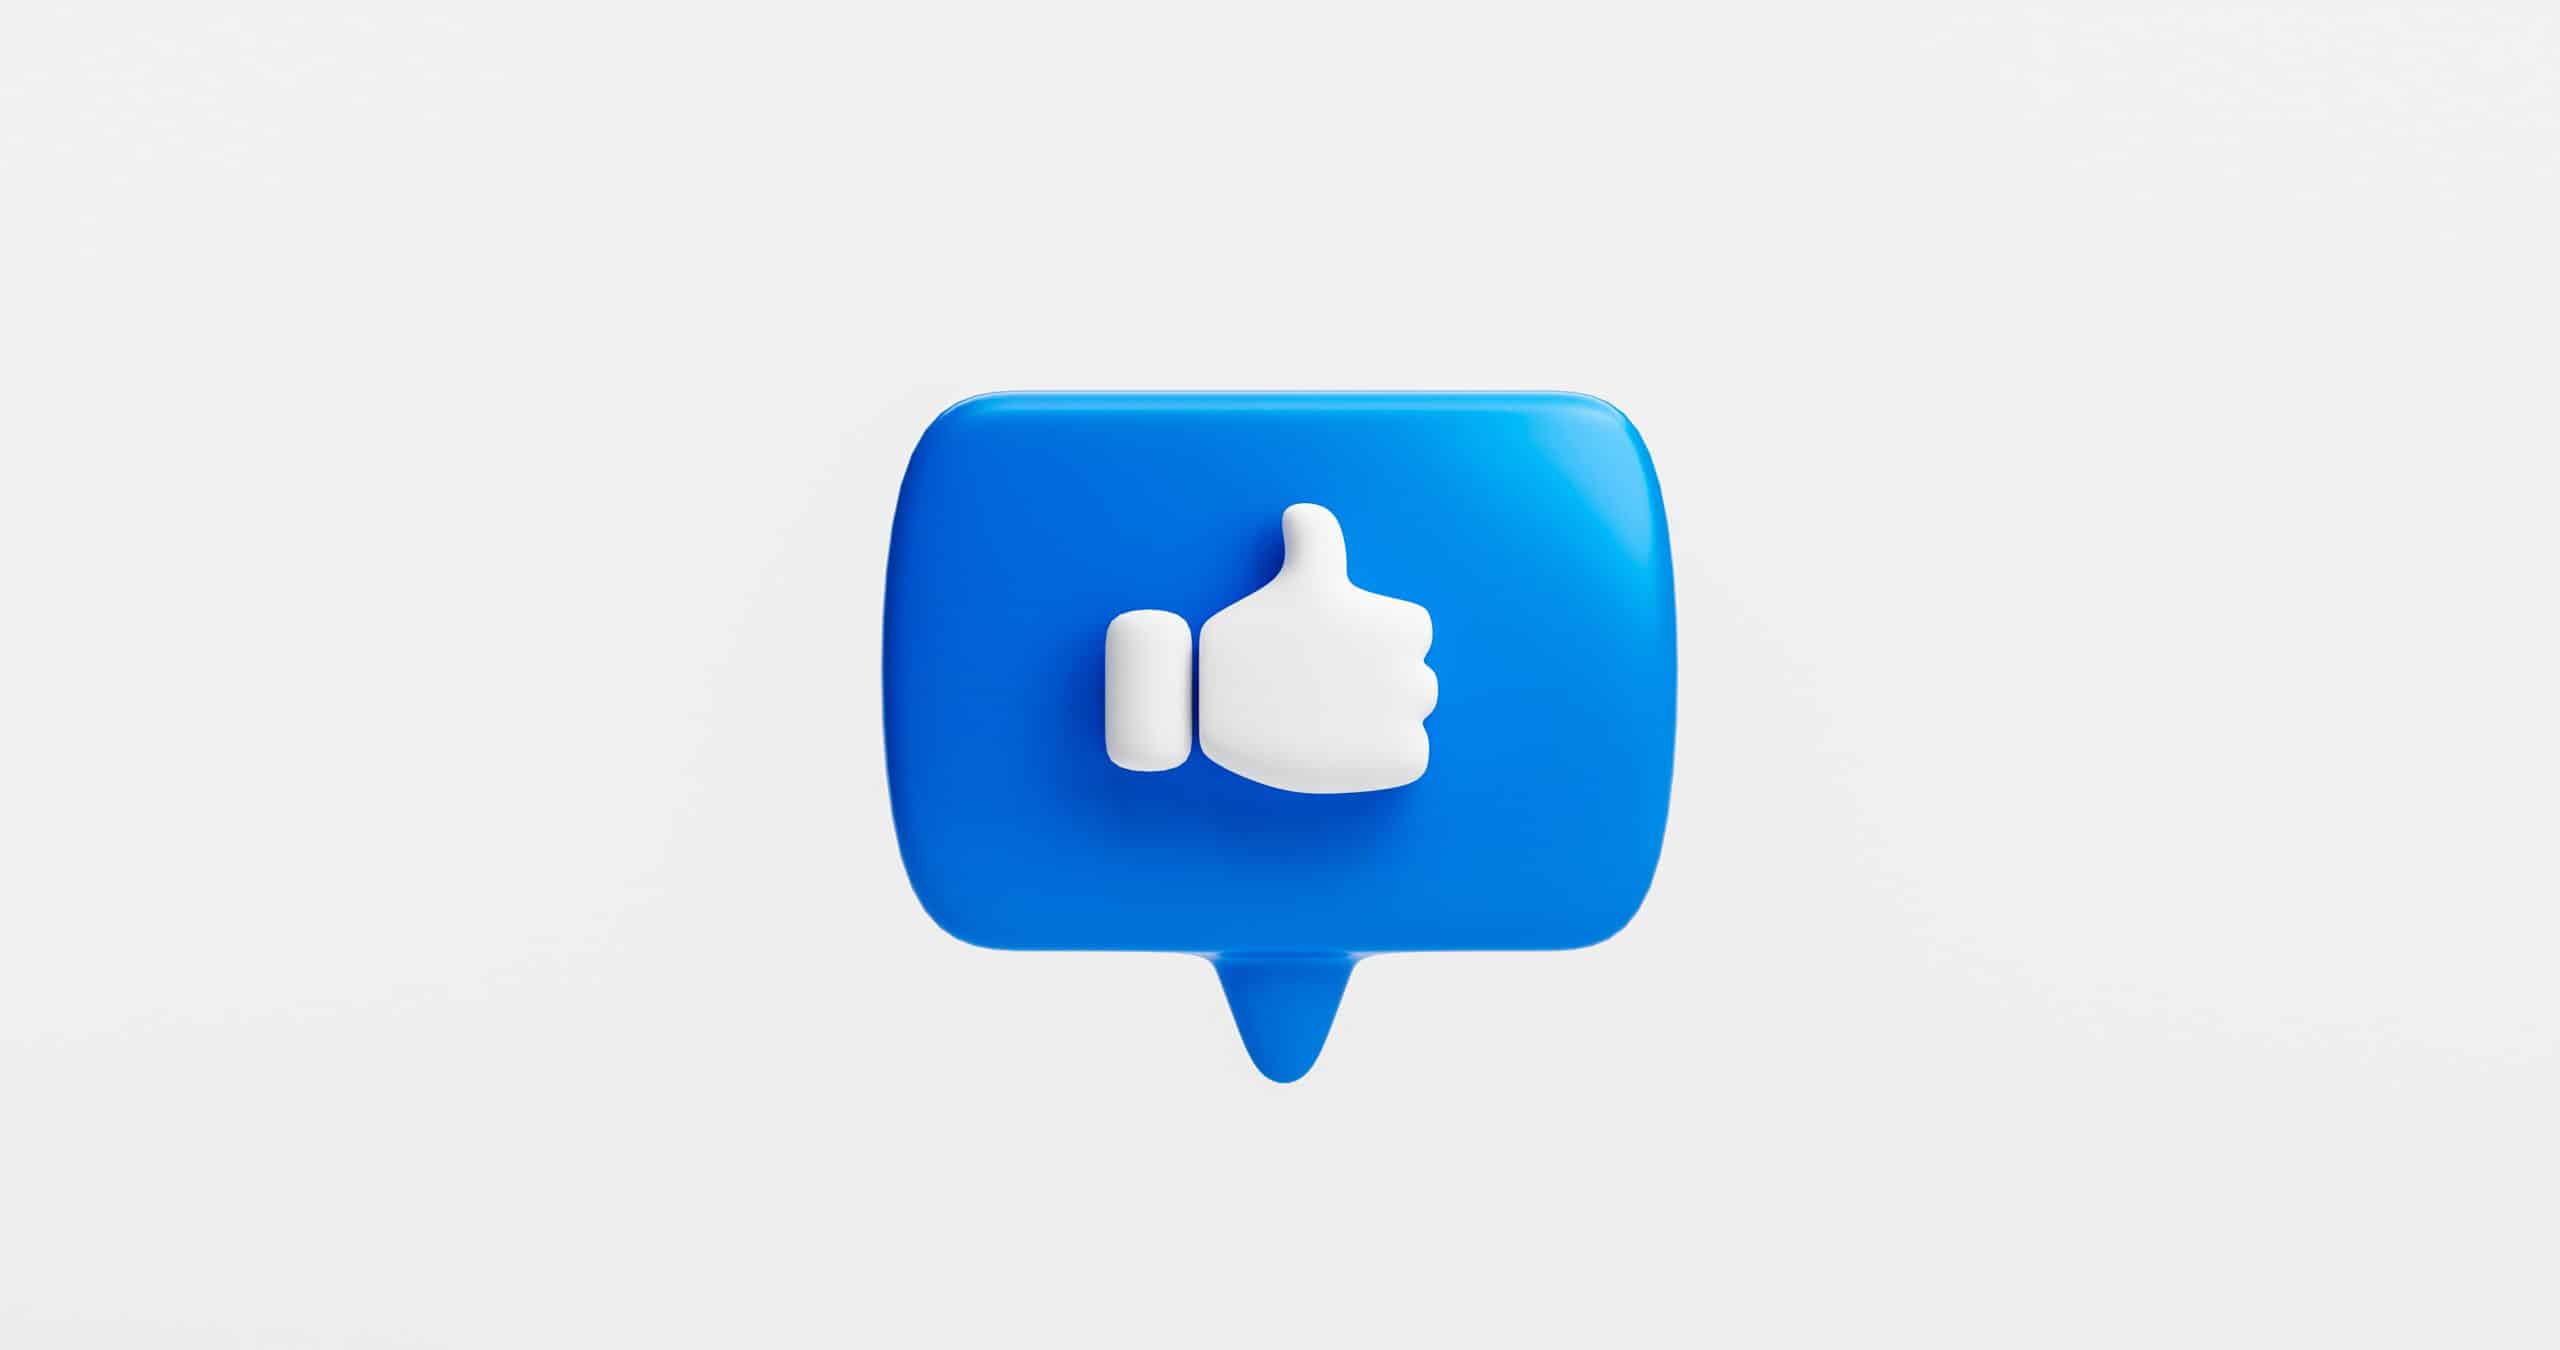 Blue bubble like button or icon thumbs up or like sign feedback